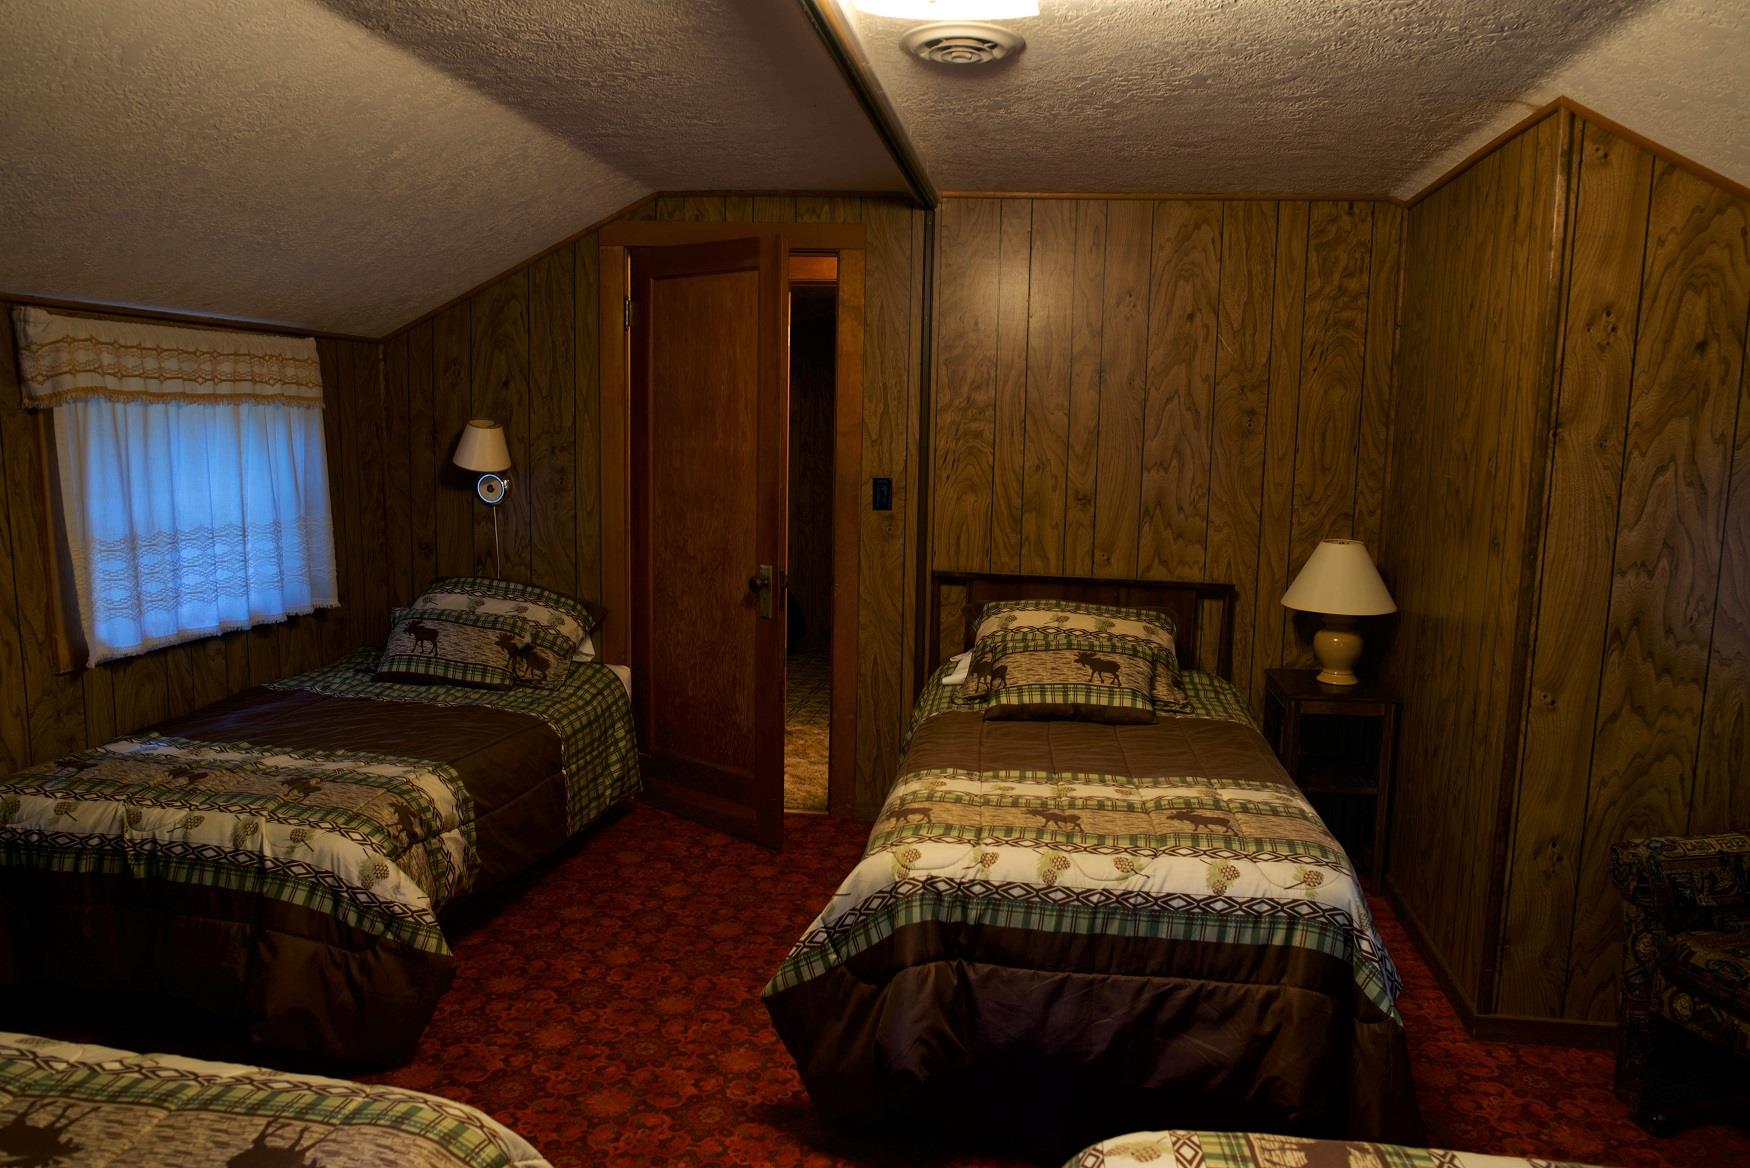 The kids will sleep tight tonight in the cozy upstairs sleeping area of Haberman Cabin at Cold Springs Resort, in Camp Sherman, Oregon